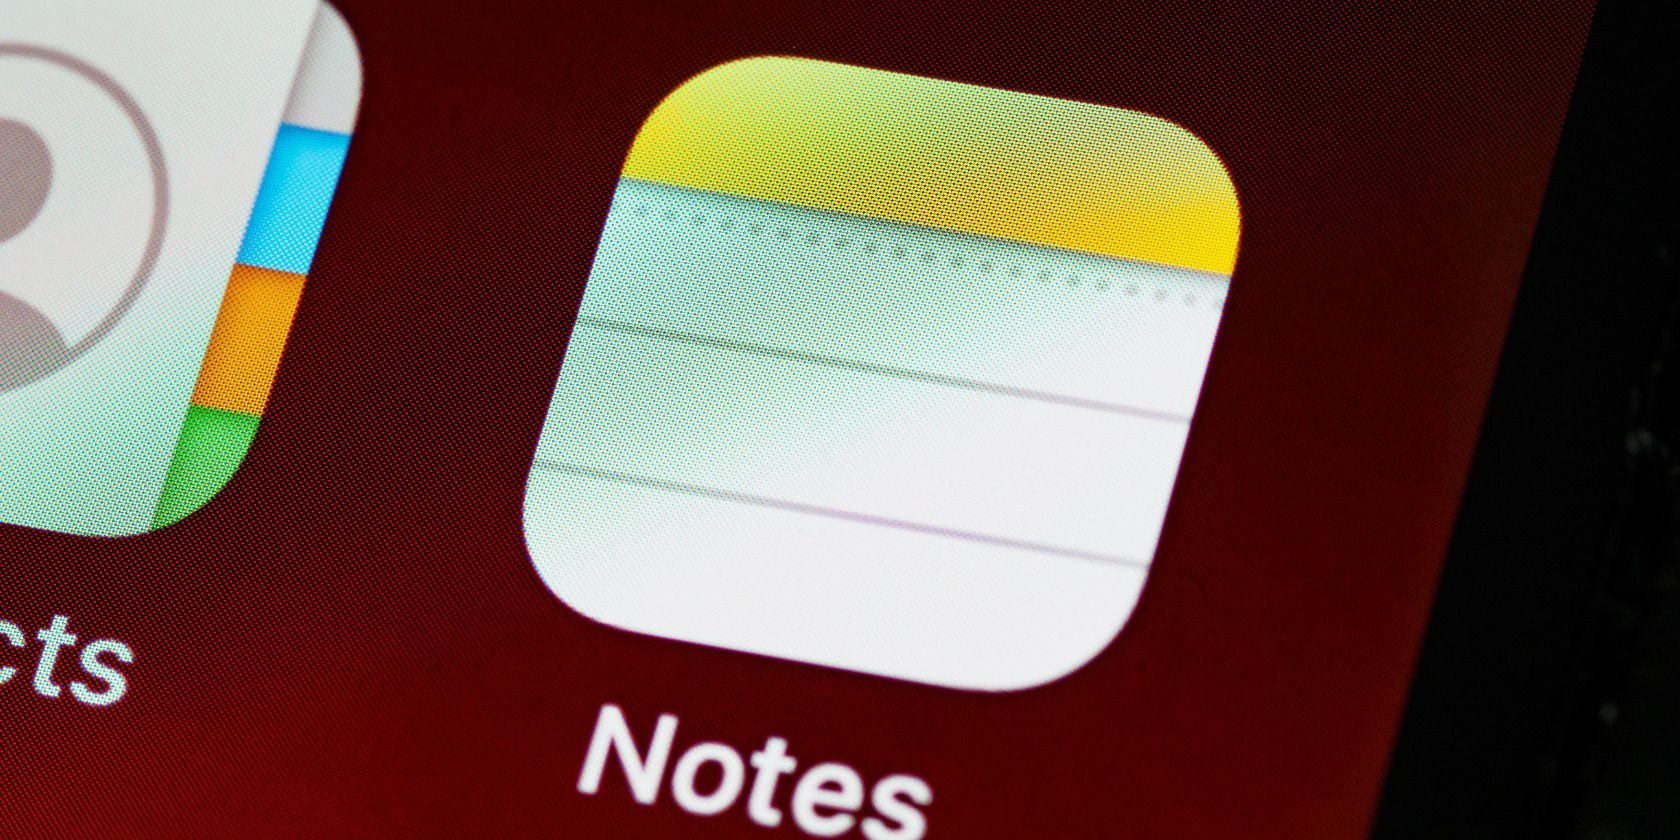 How to Recover Deleted Notes on iPhone